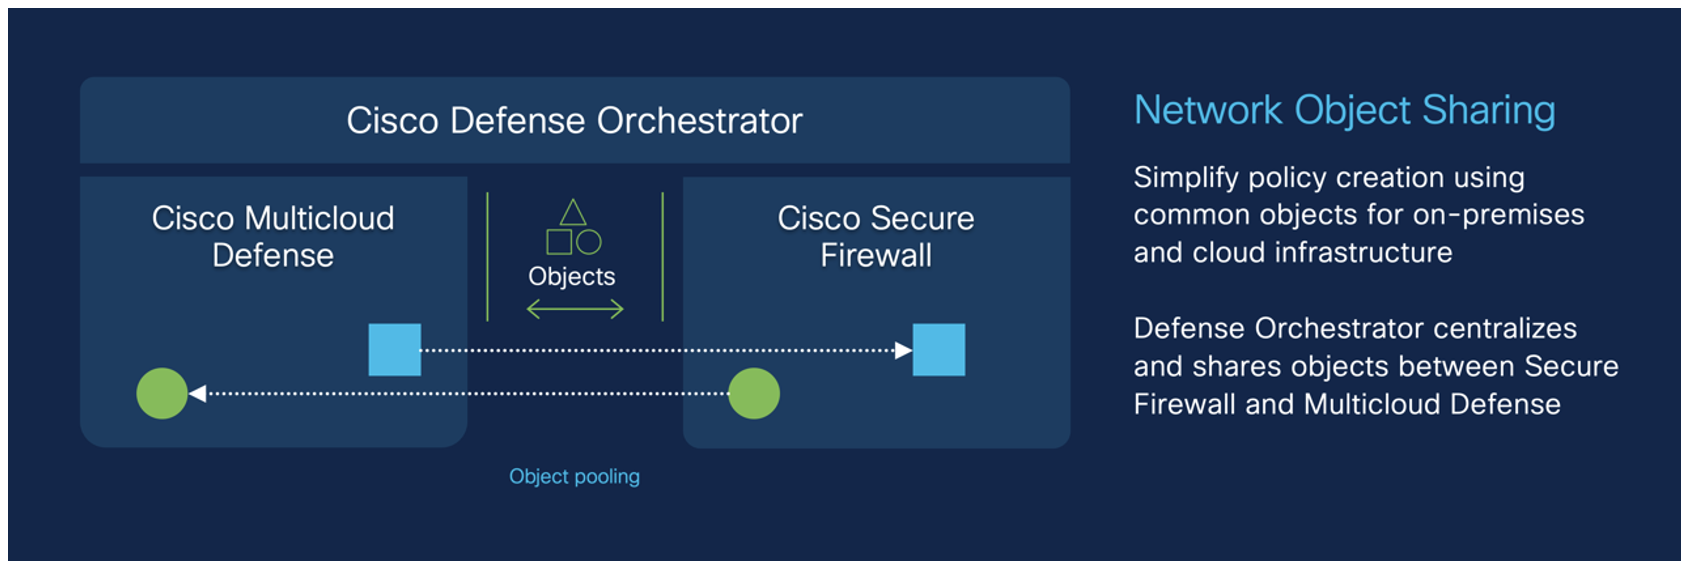 Graphic showing how network object sharing simplifies policy creation using common objects or on-premises and cloud infrastructure, with Defense Orchestrator centralizing and sharing objects between Secure Firewall and Multicloud Defense